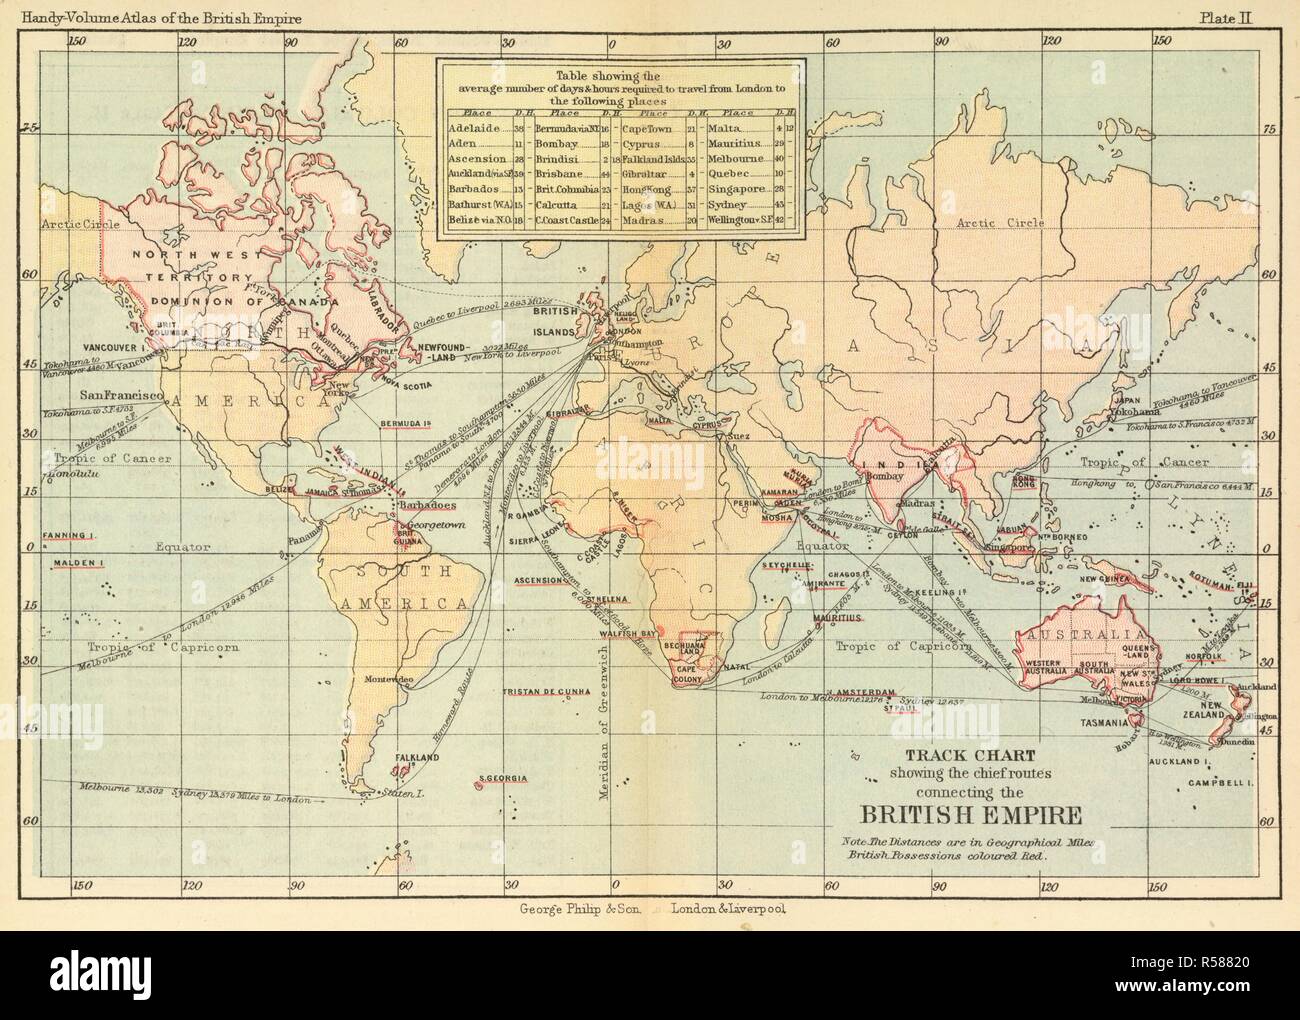 A track chart showing the chief routes connecting the British Empire.  Philips' Handy-Volume Atlas of the British Empire ... By J.F. Williams.  London and Liverpool : G. Philip & Son, 1887. Source: